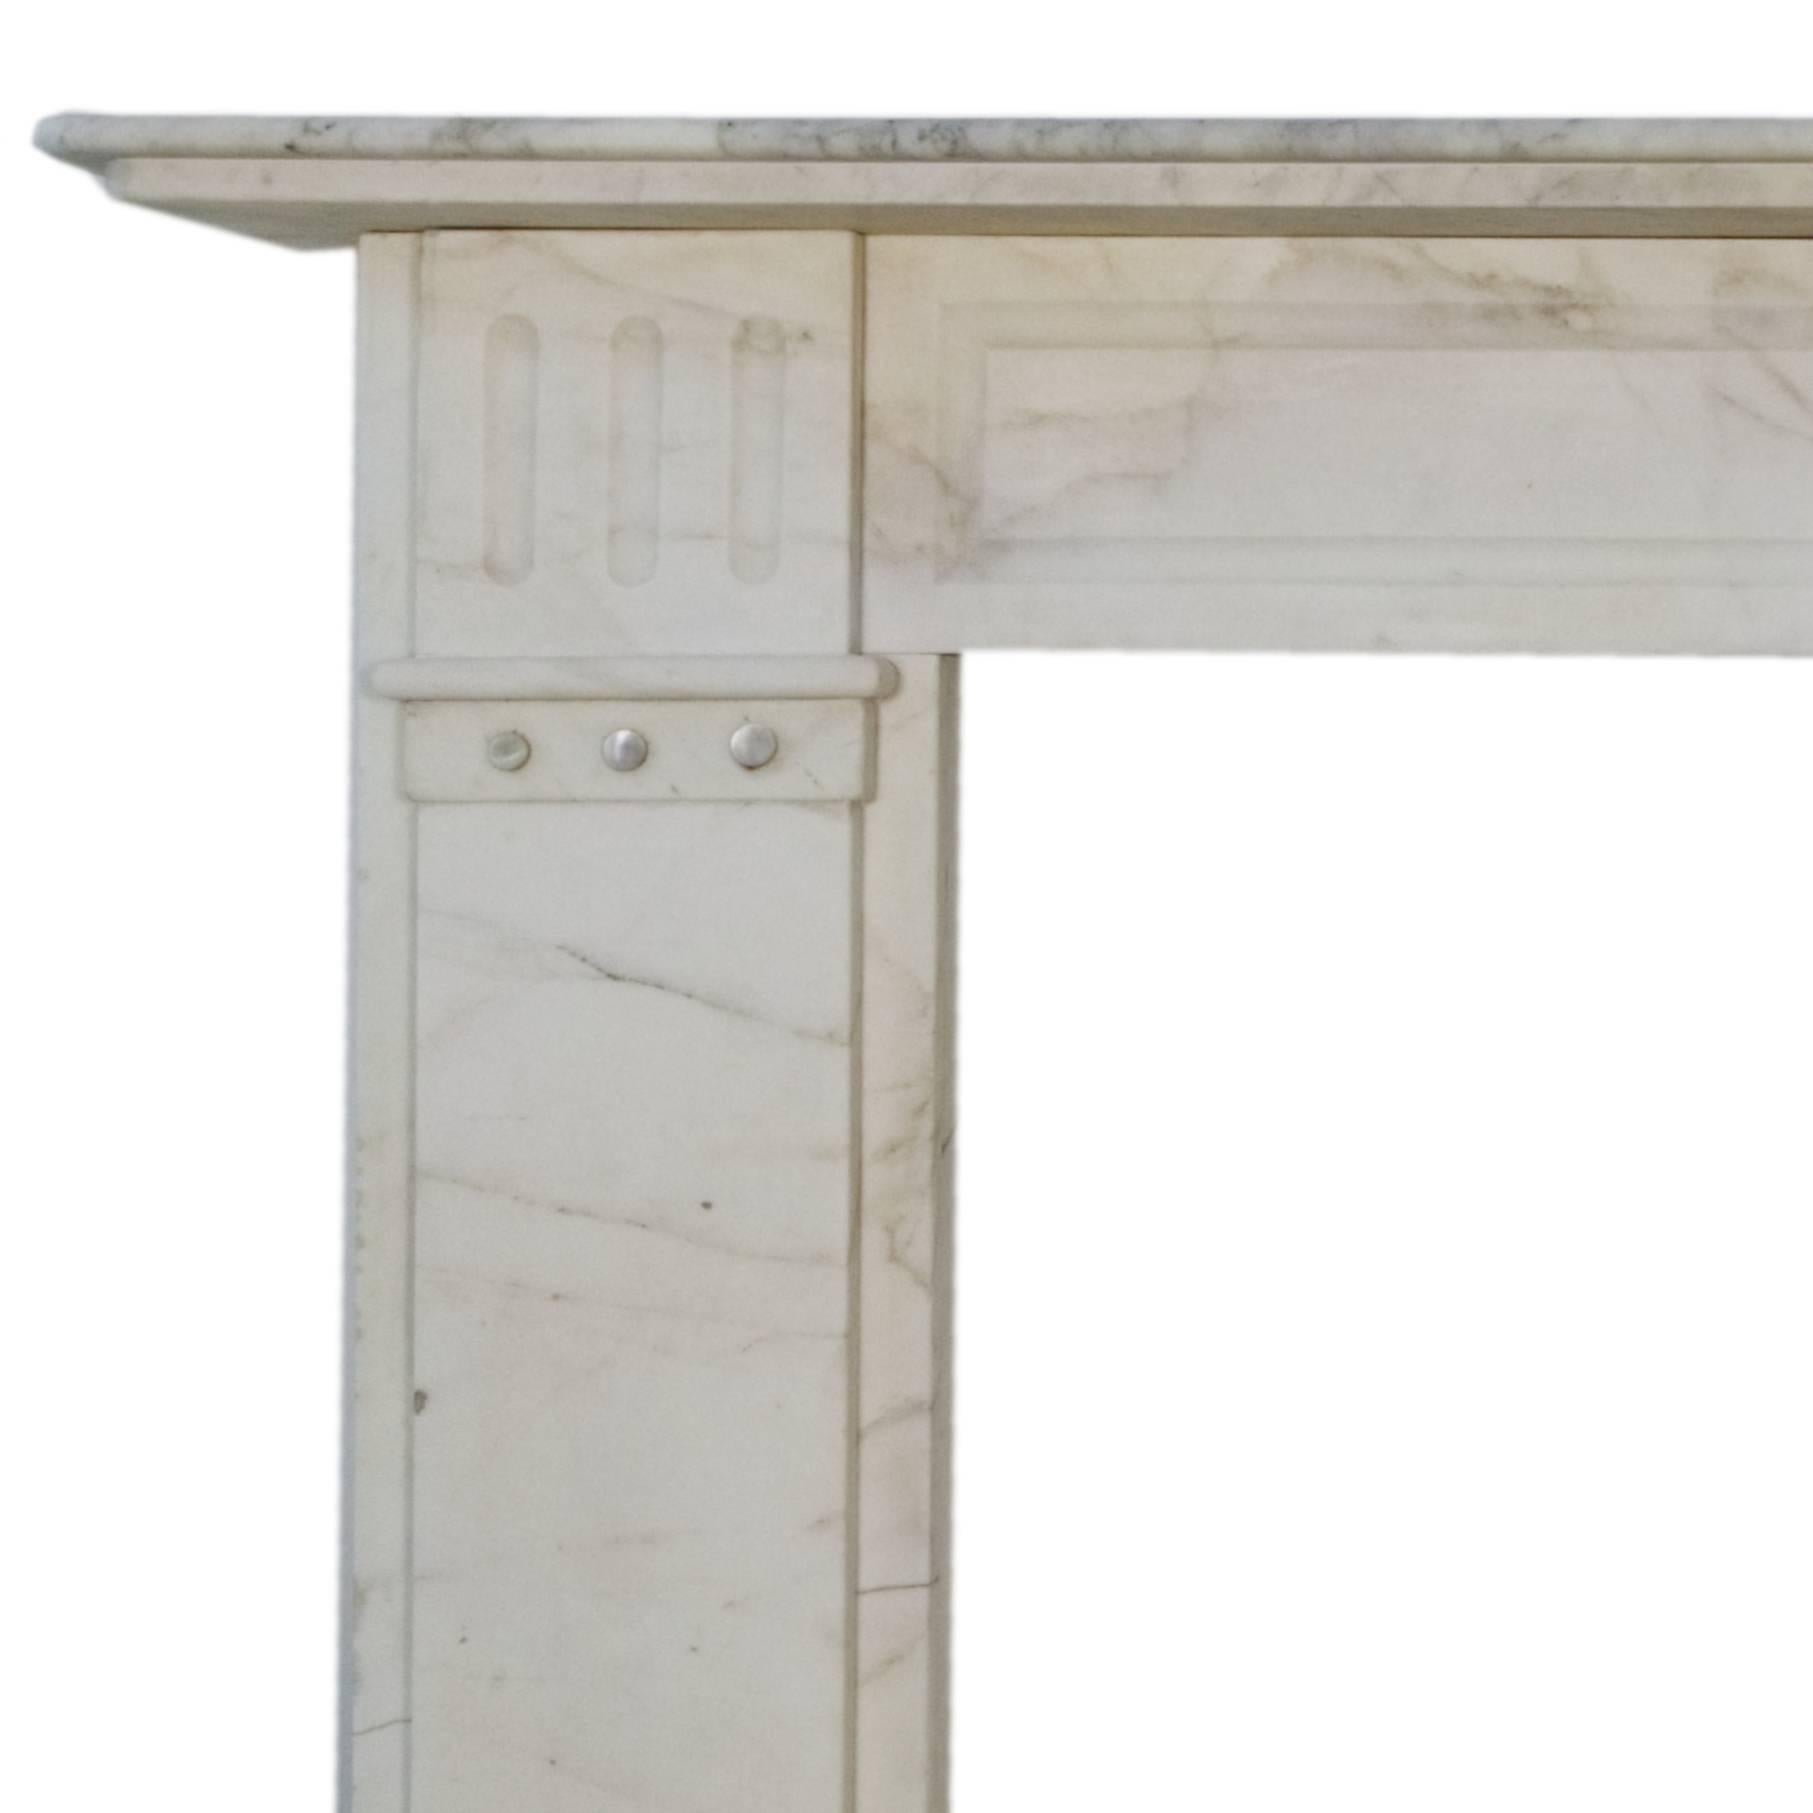 19th century Victorian Carrara marble fireplace mantel, with flutes to upper part of each leg with pearl like circular decorative details and stepped shelf.
Salvaged from a central London terraced town house.

Measure: Shelf width 63 1/8